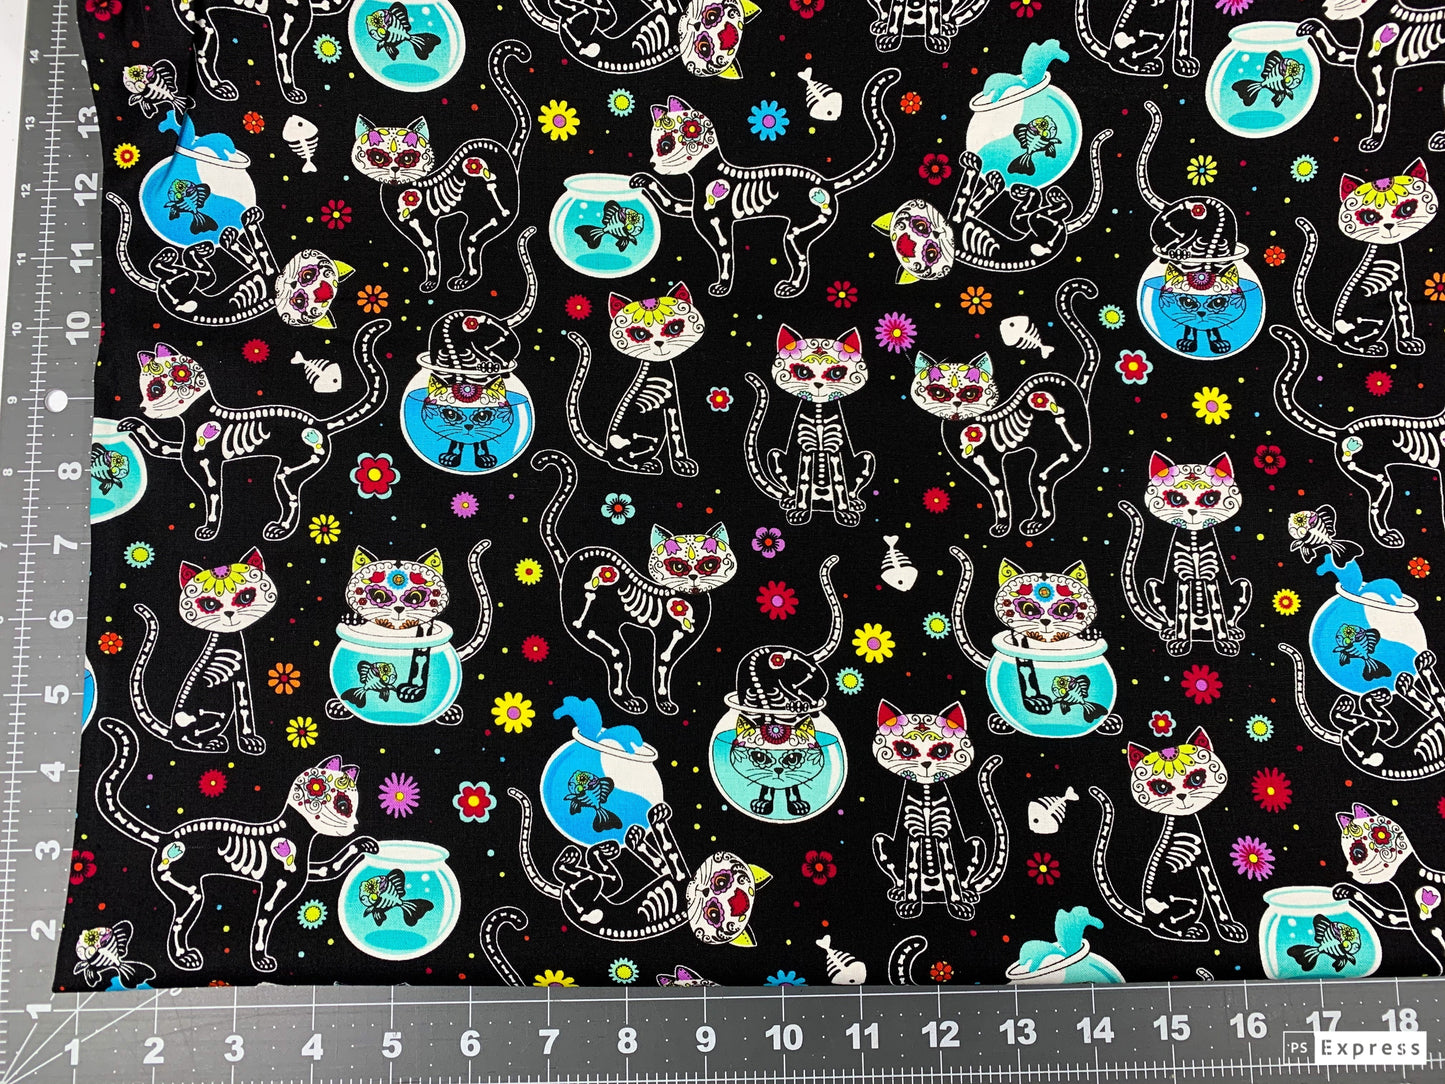 Skeleton and Fishbowls cat fabric C4159 Cats cotton fabric